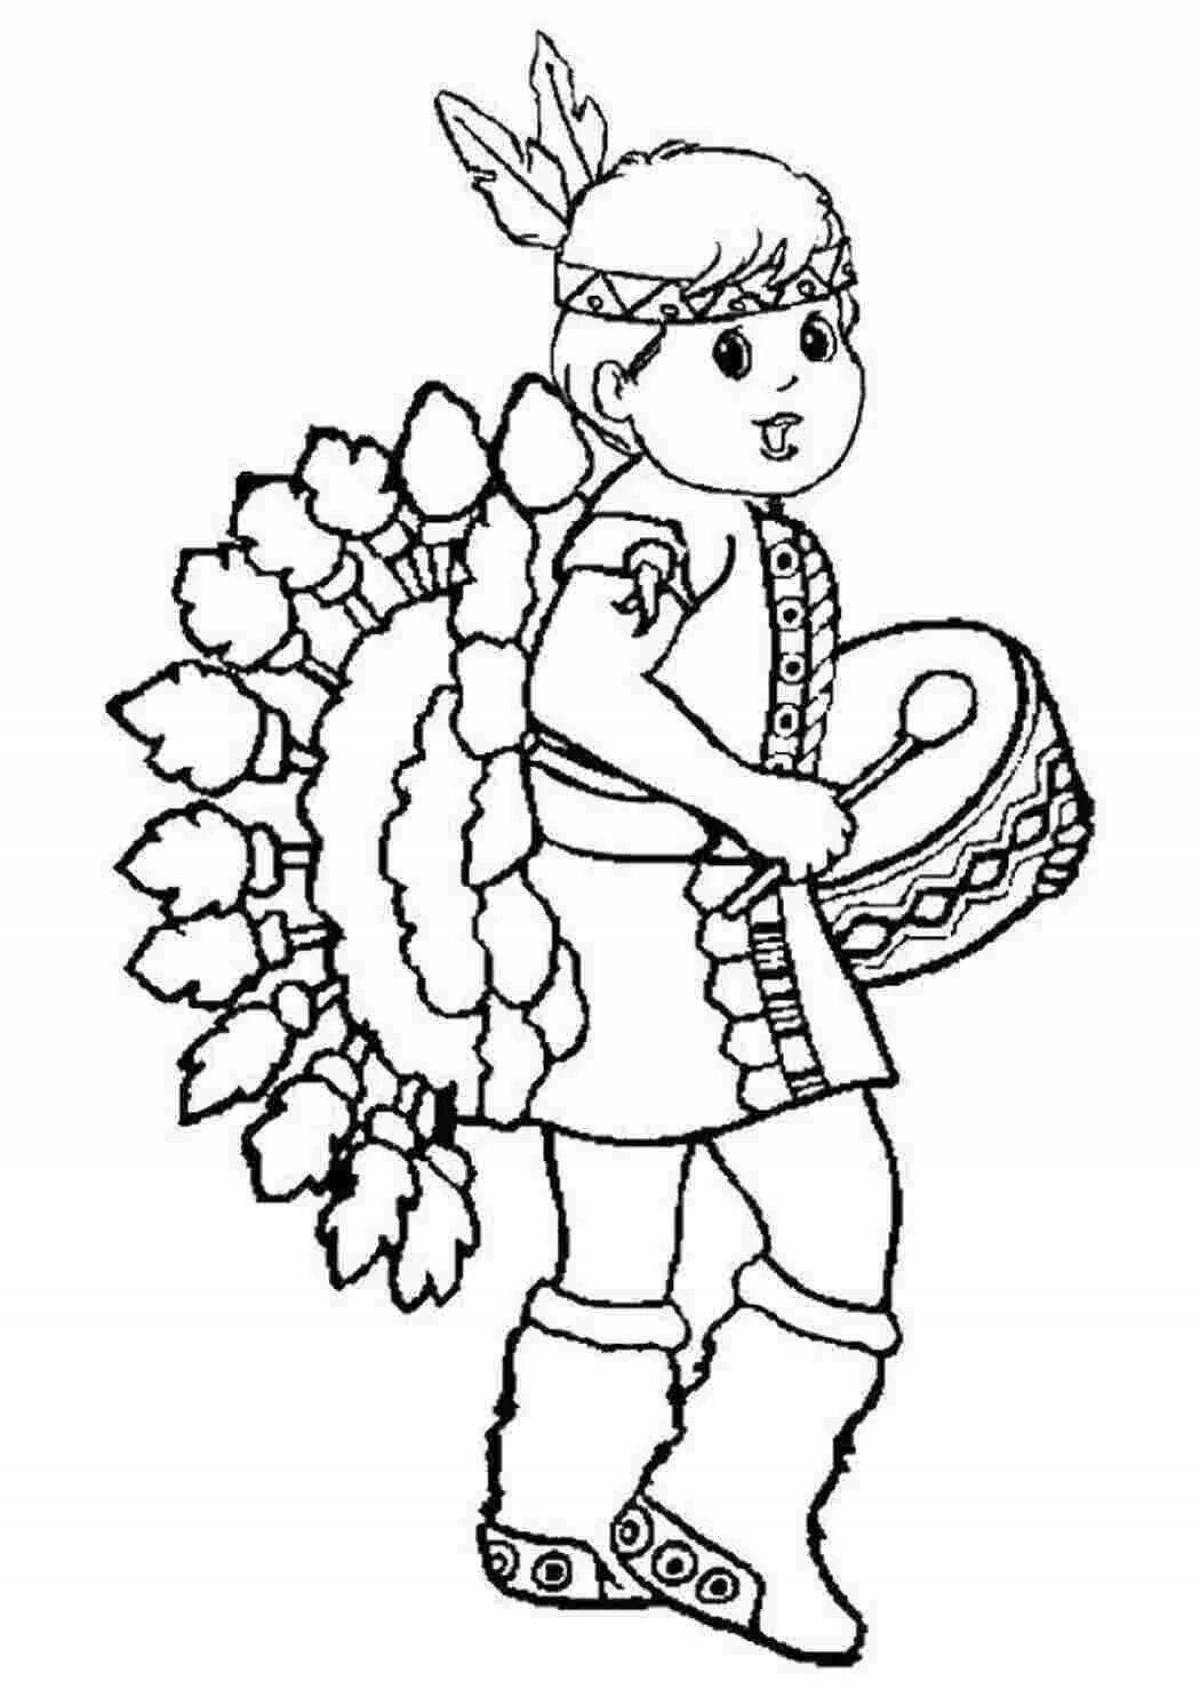 Colorful Indian coloring book for kids